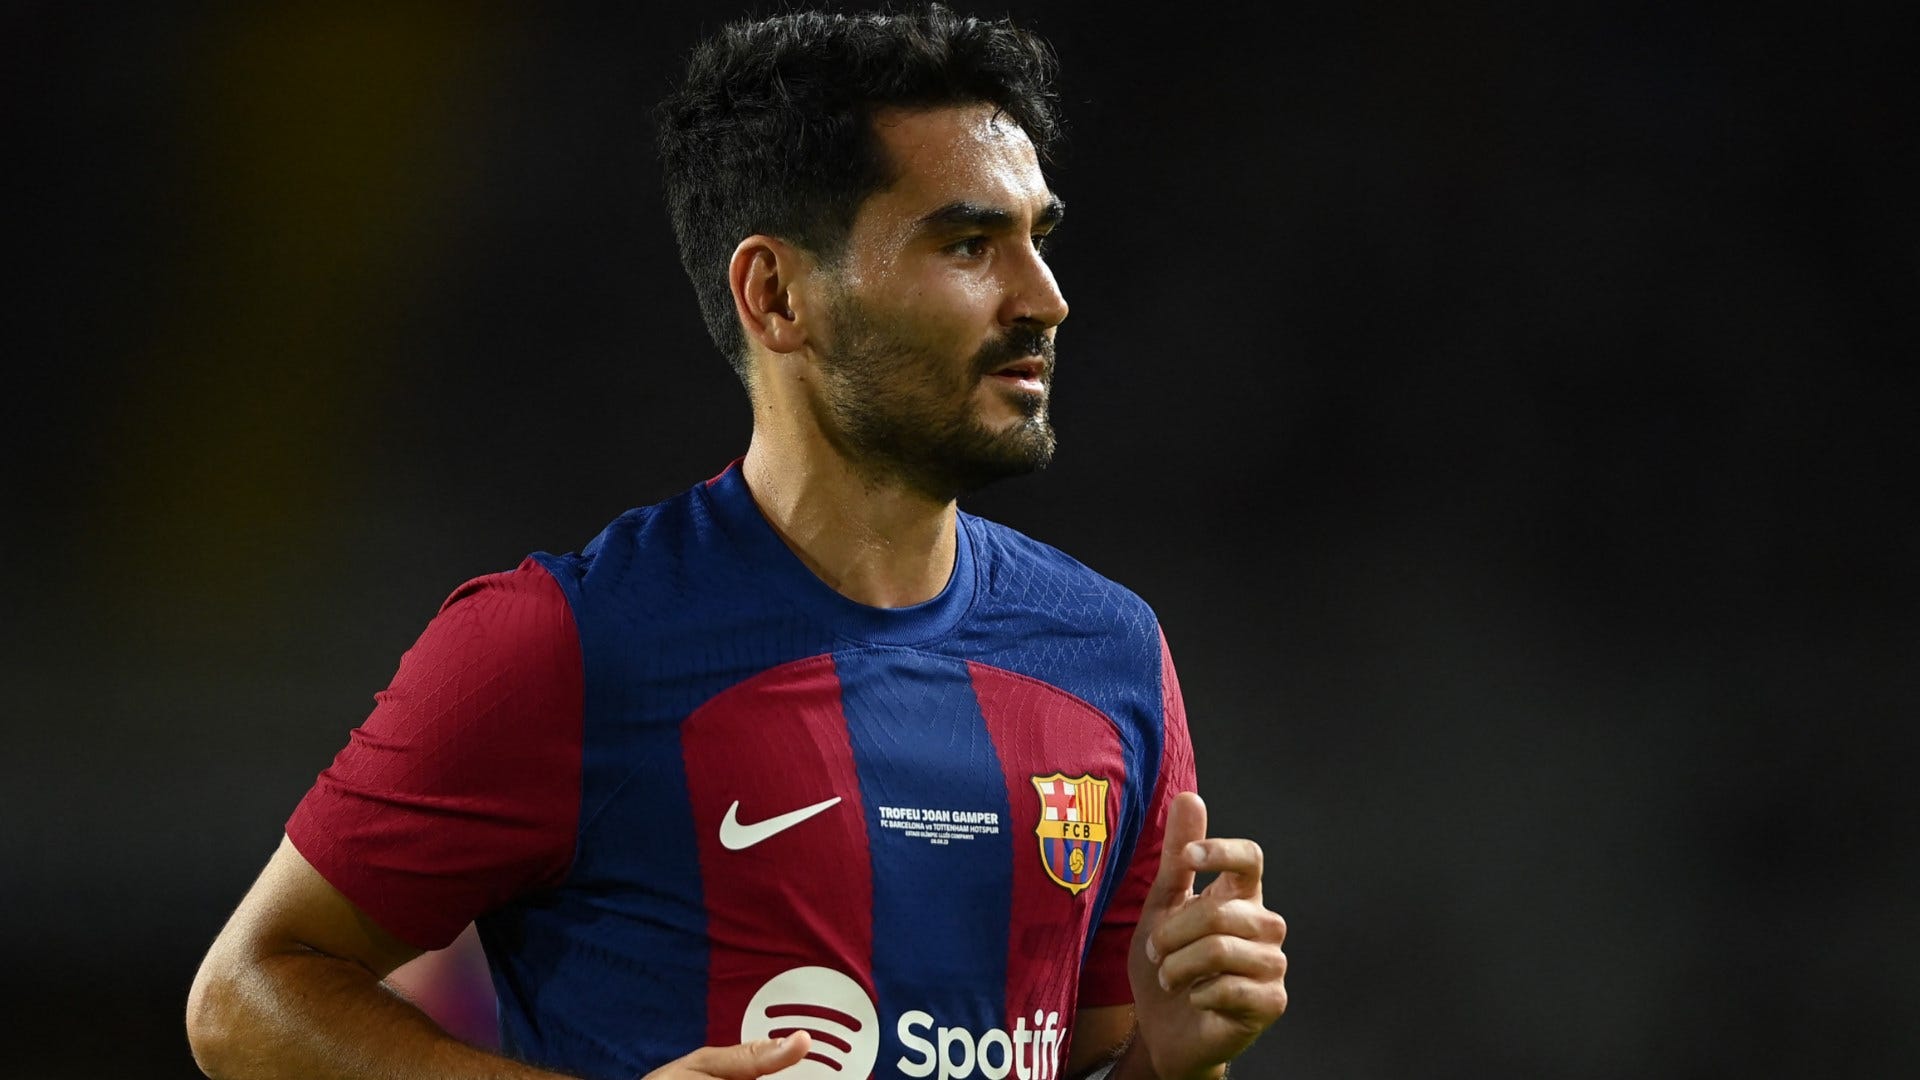 Getafe vs Barcelona Where to watch the match online, live stream, TV channels, and kick-off time Goal UK